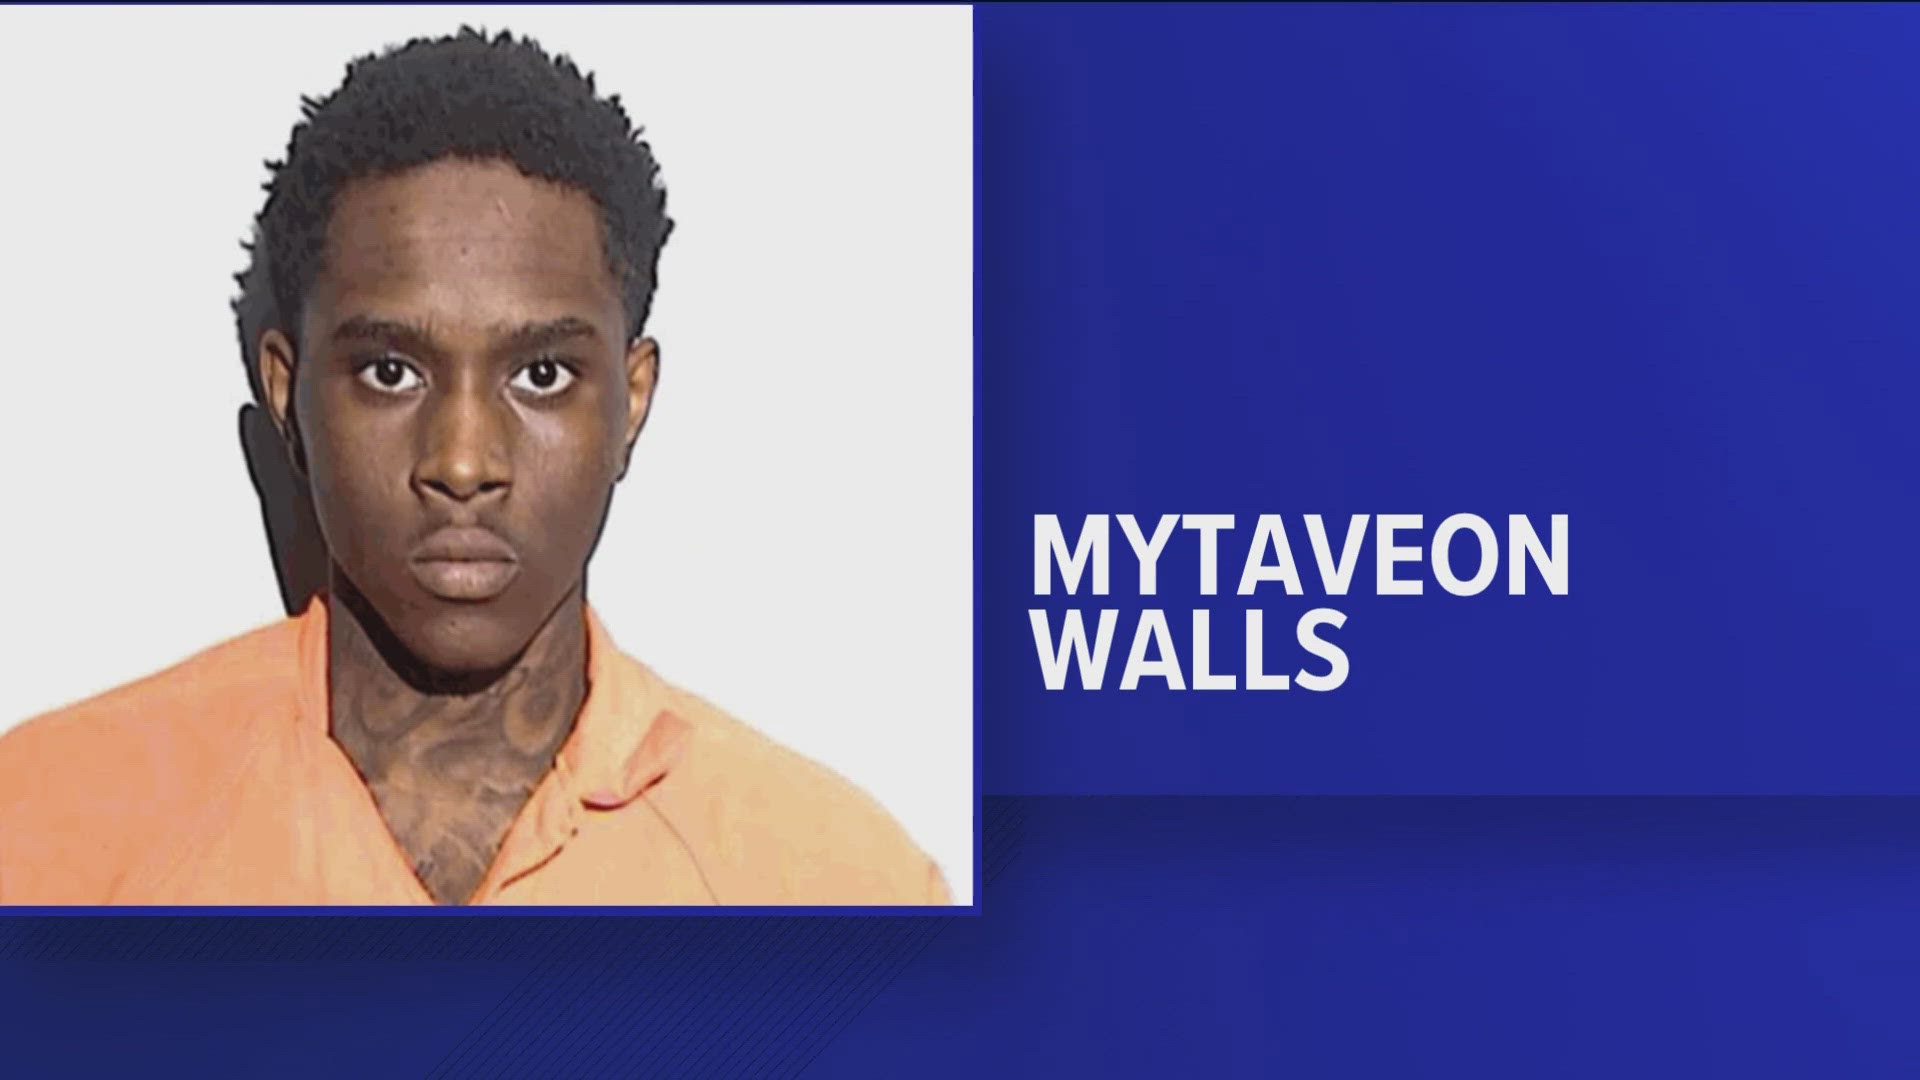 Mytaveon Walls was indicted Wednesday on two murder charges and a felonious assault charge for the shooting death of James Smith Jr.